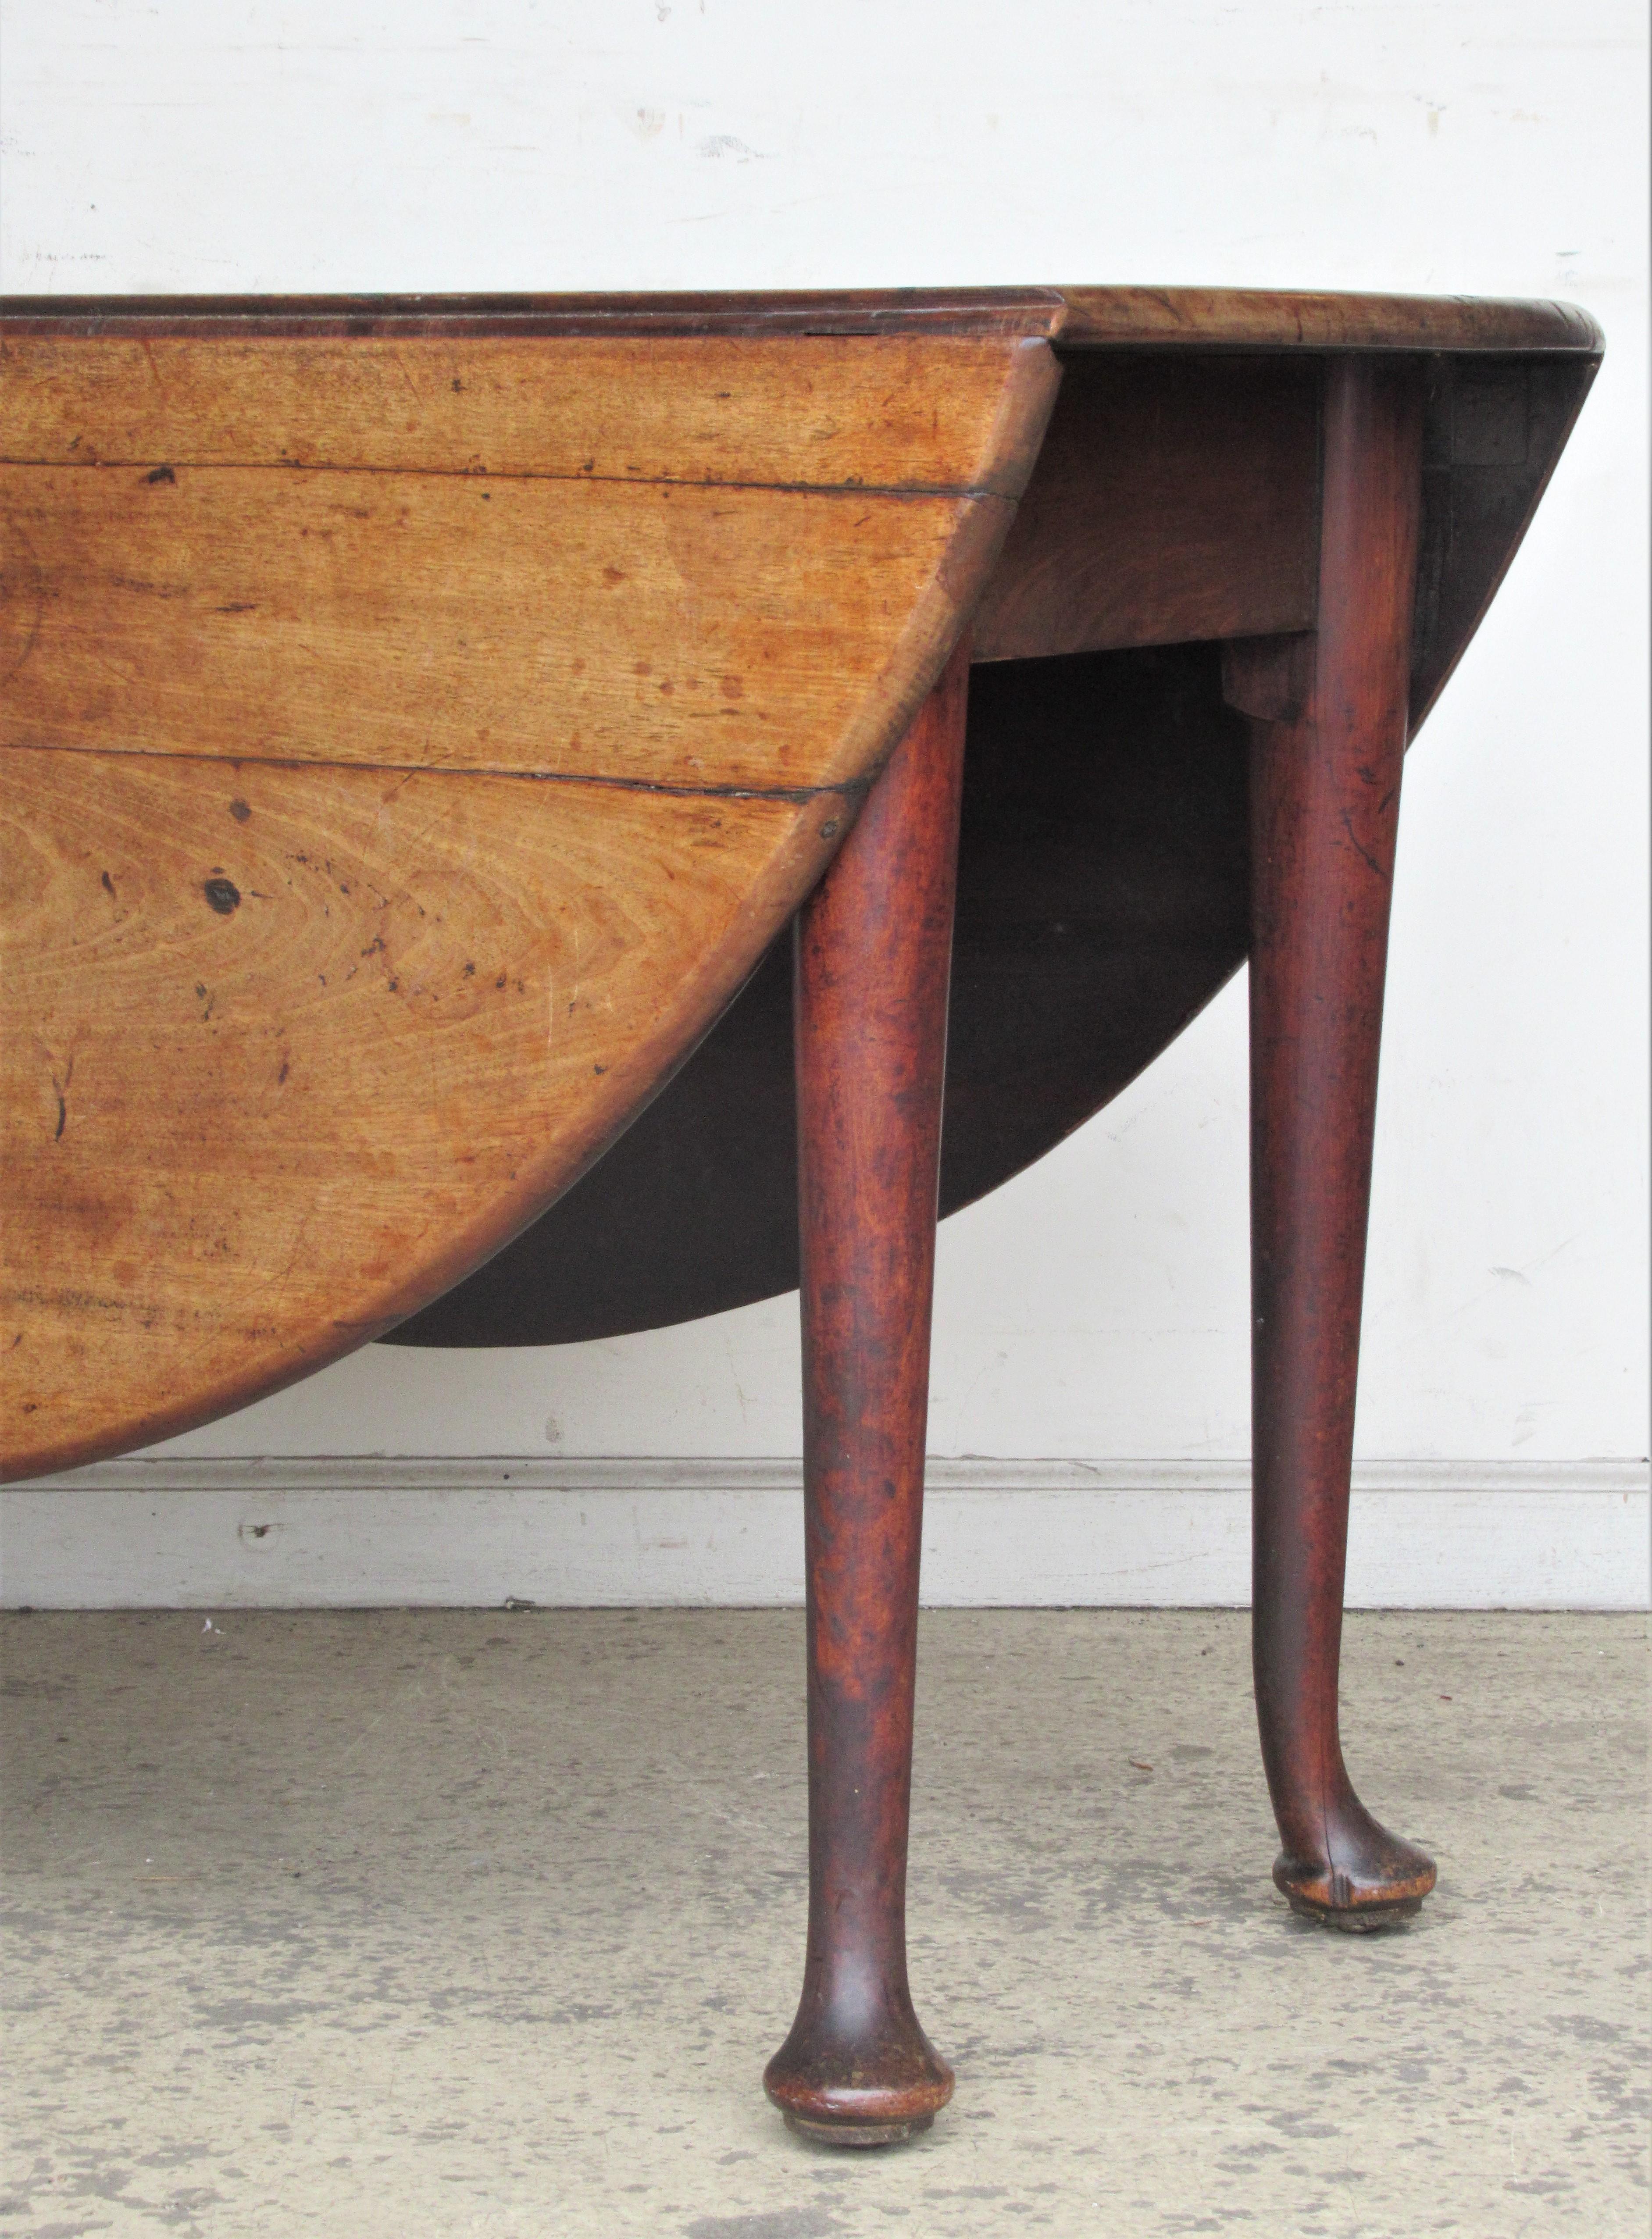 Hand-Carved 18th Century American Queen Anne Drop-Leaf Table